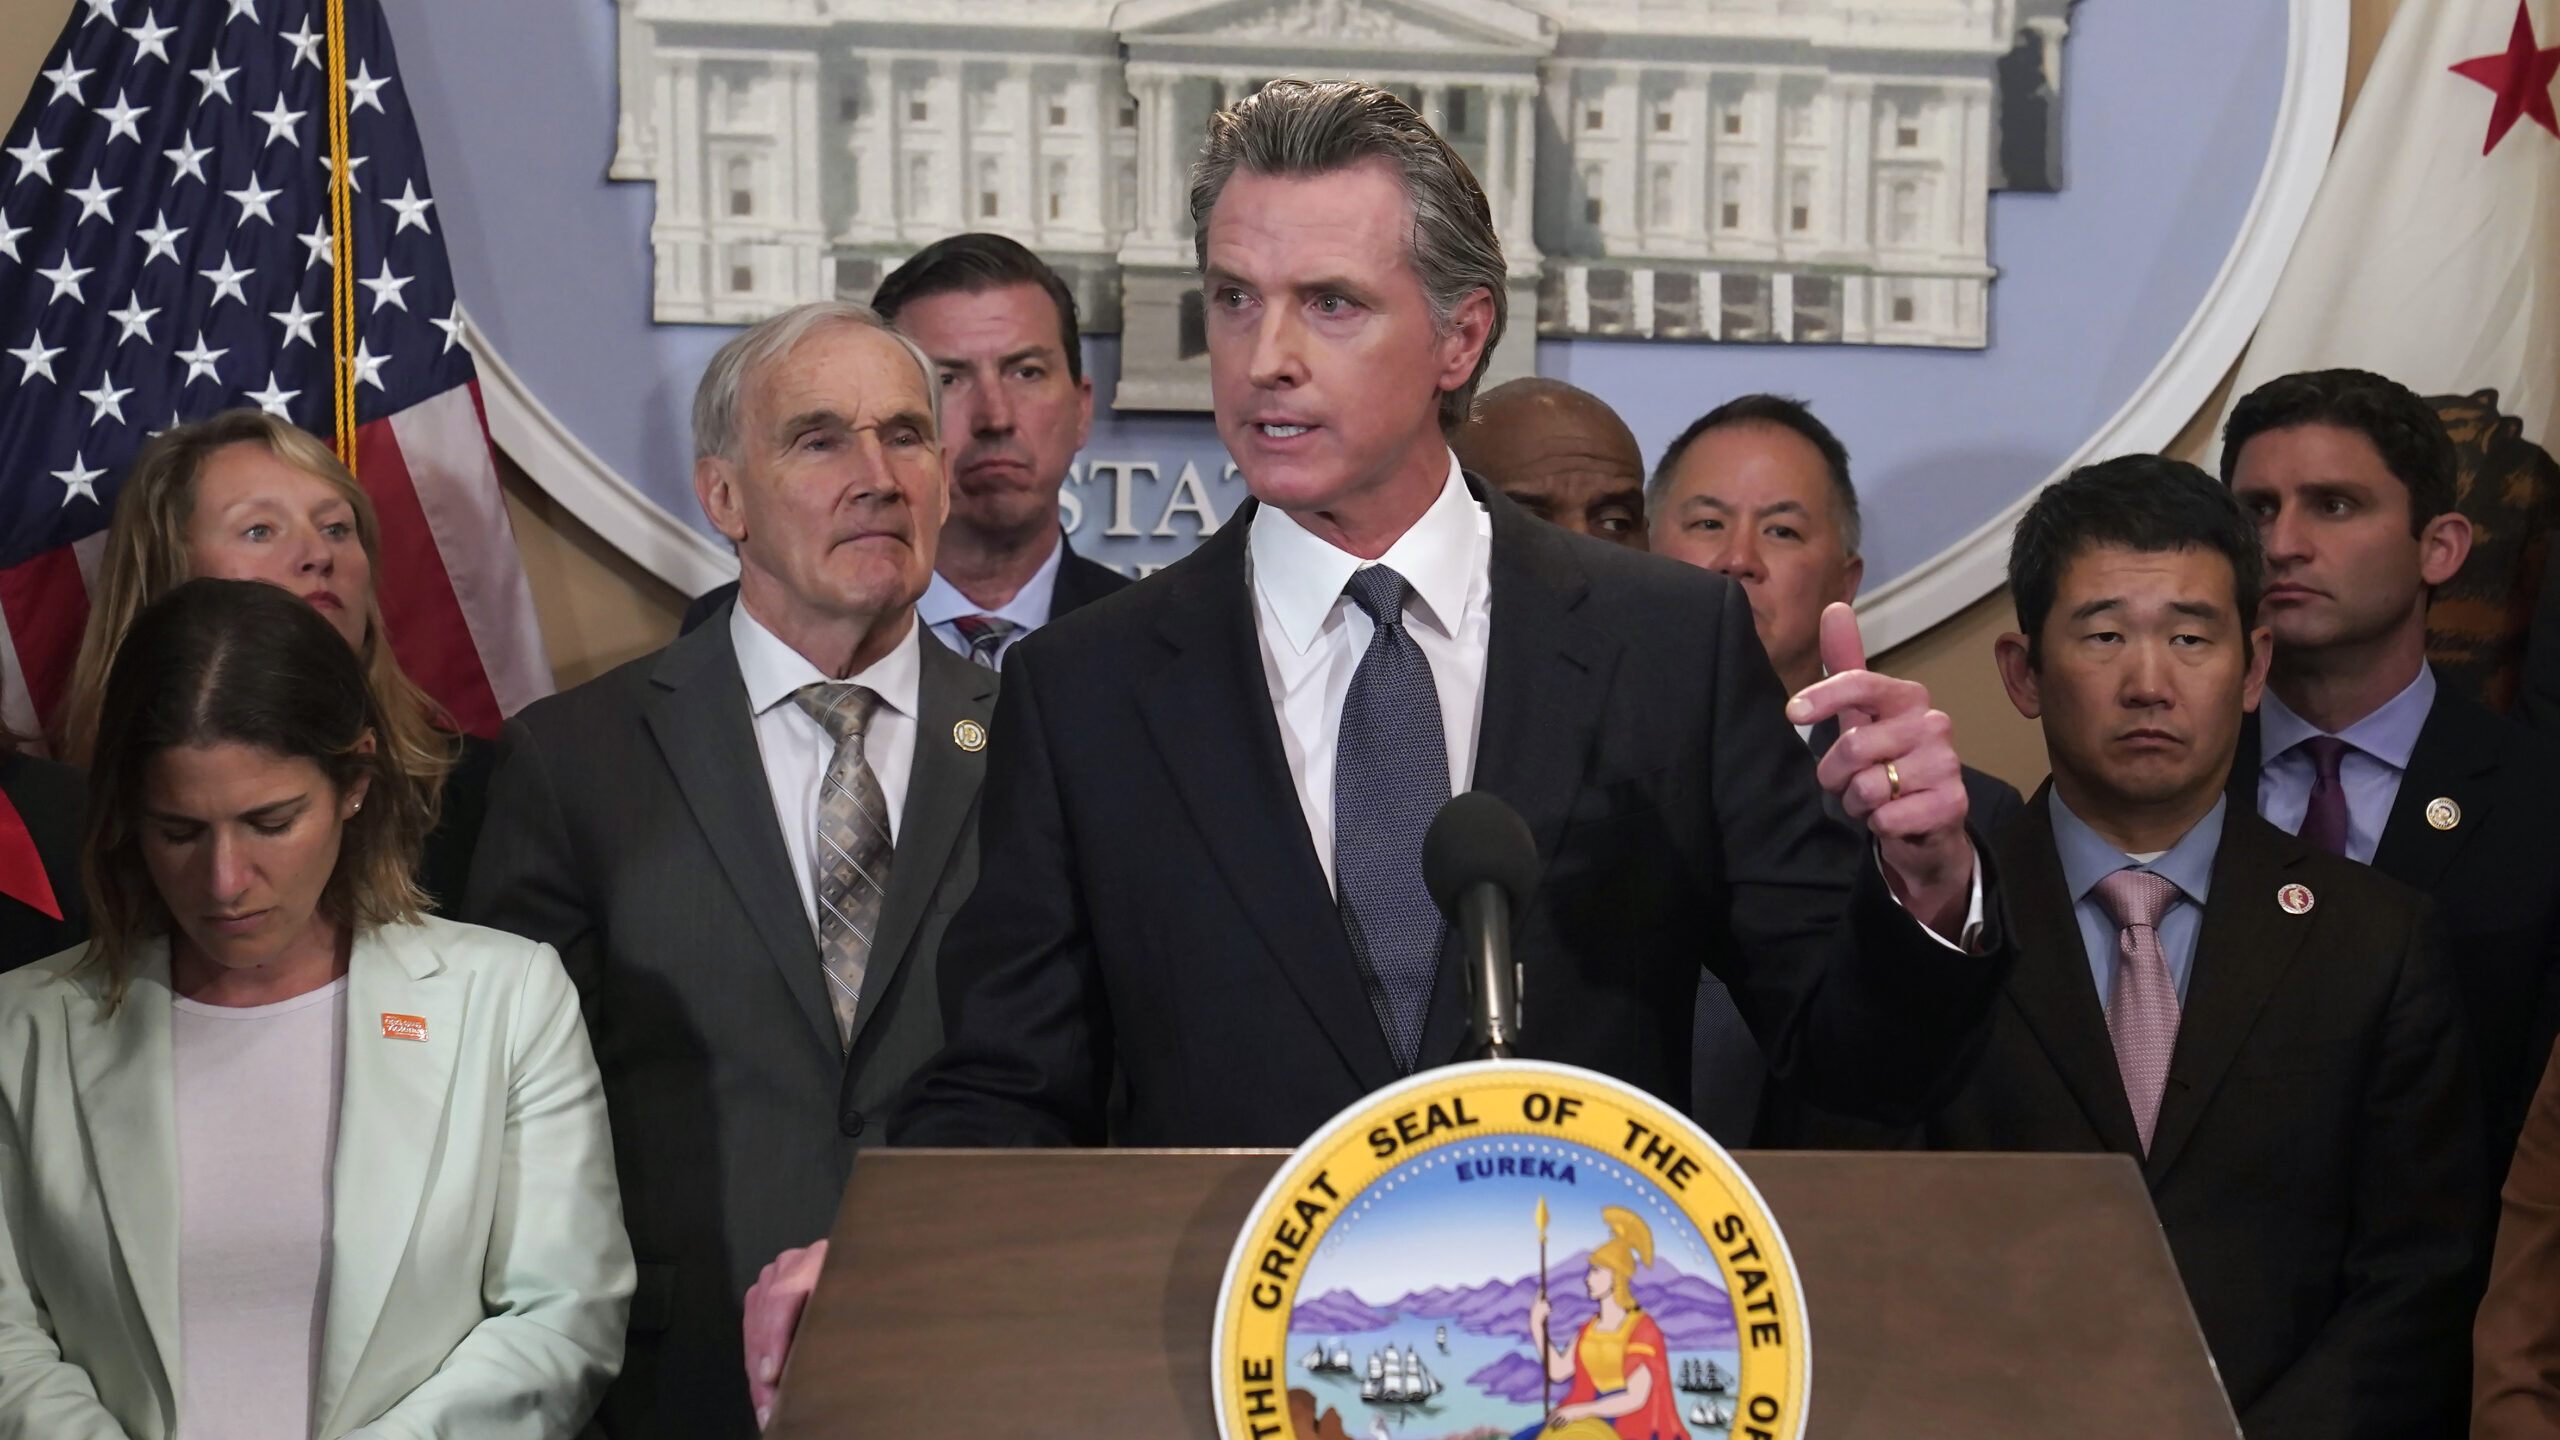 California Gov. Gavin Newsom discusses the recent mass shooting in Texas, during a news conference in Sacramento, Calif., Wednesday, May 25, 2022. Flanked by lawmakers from both houses of the state legislature, Newsom said he is ready to sign more restrictive gun measures passed by lawmakers.(AP Photo/Rich Pedroncelli)